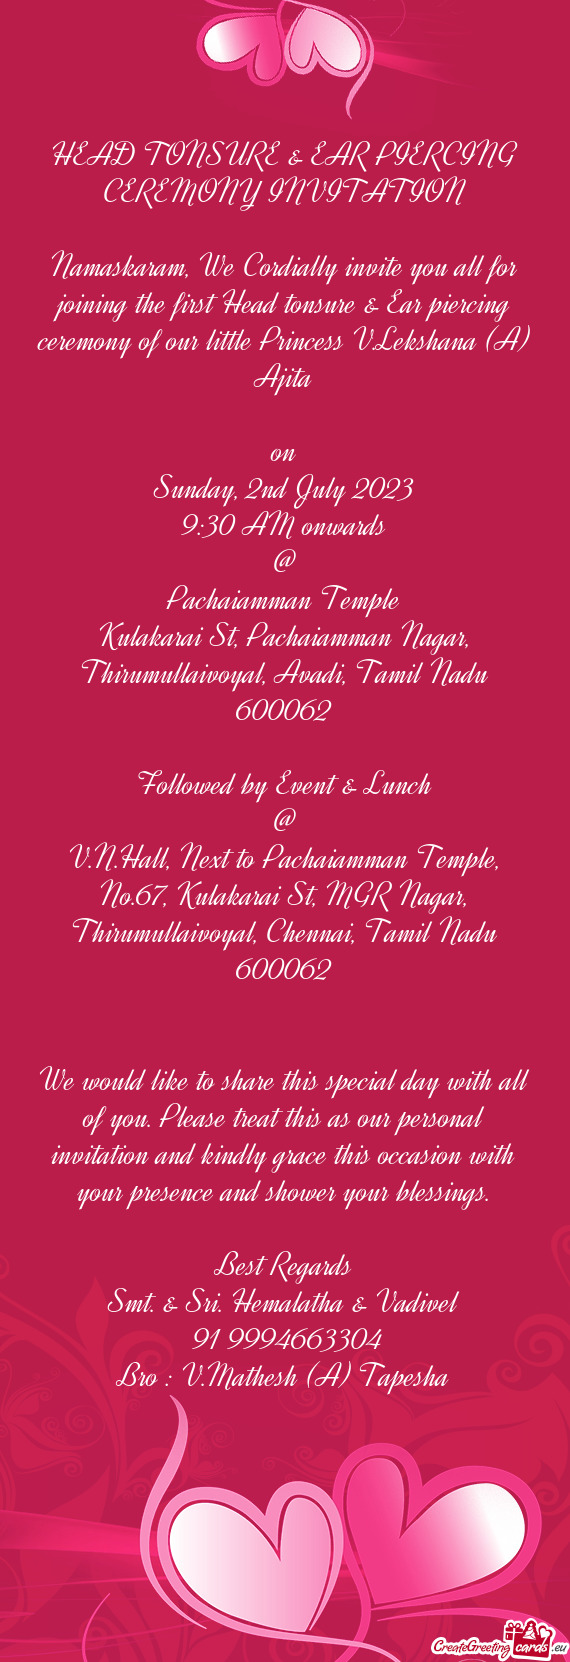 Namaskaram, We Cordially invite you all for joining the first Head tonsure & Ear piercing ceremony o